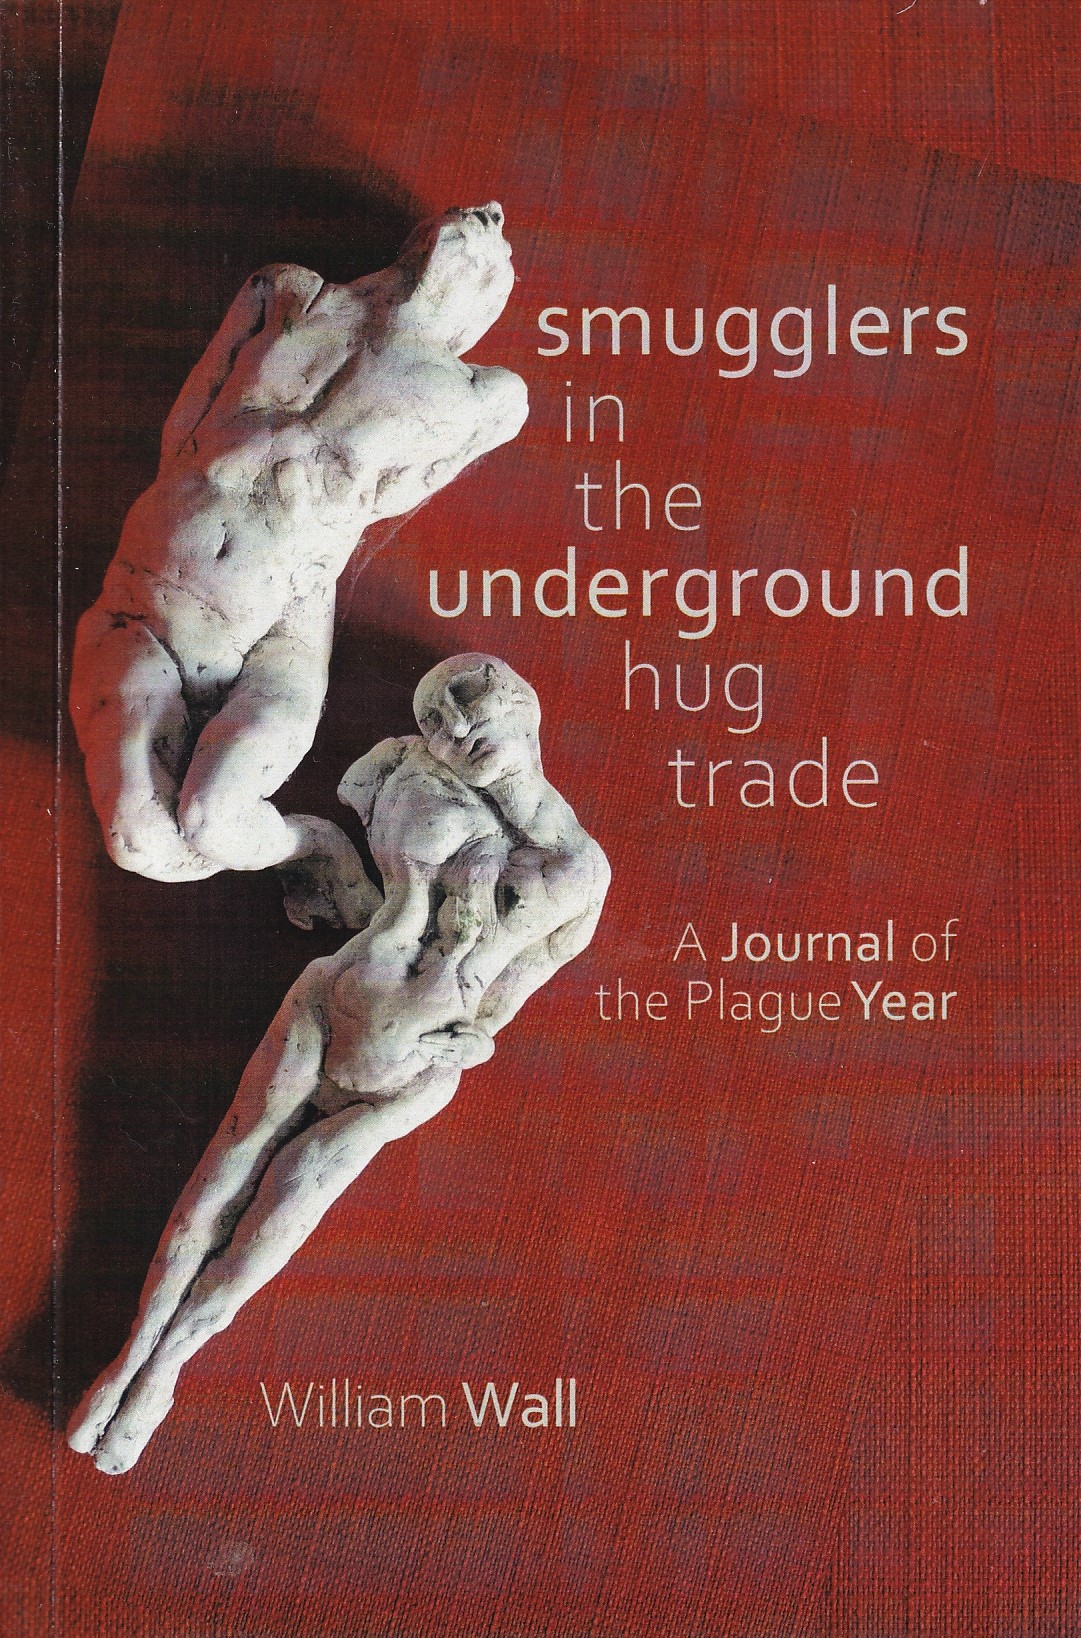 Smugglers in the Underground Hug Trade: A Journal of the Plague Year | William Wall | Charlie Byrne's